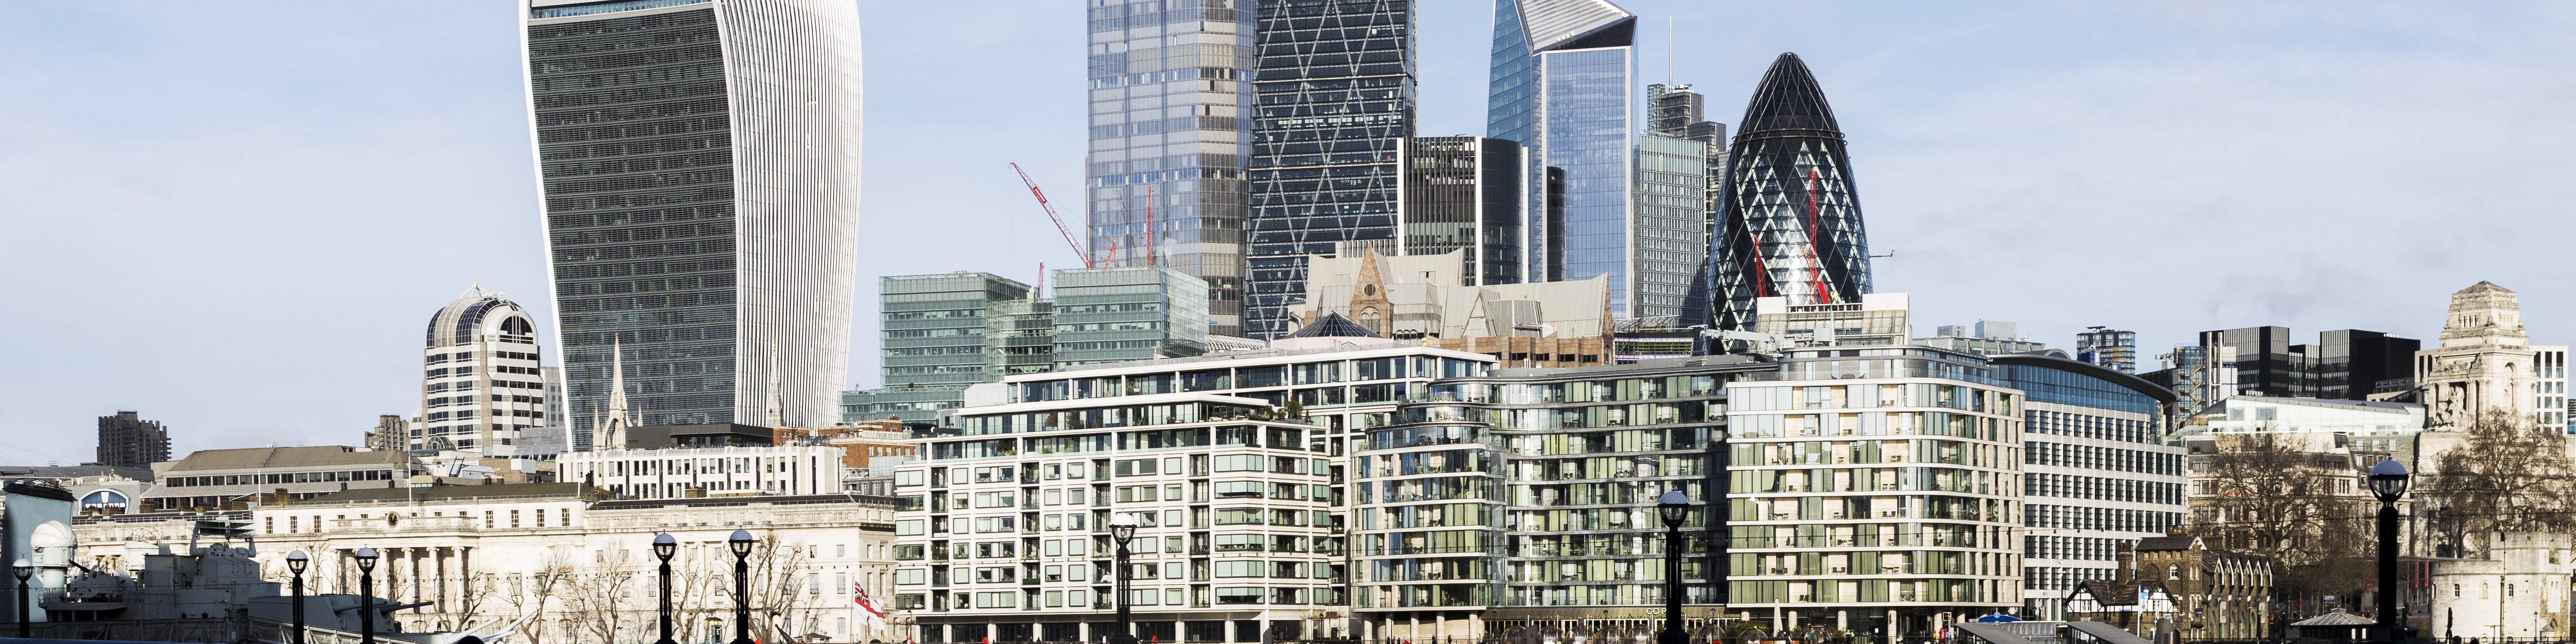 Modern London architecture and the city skyline,